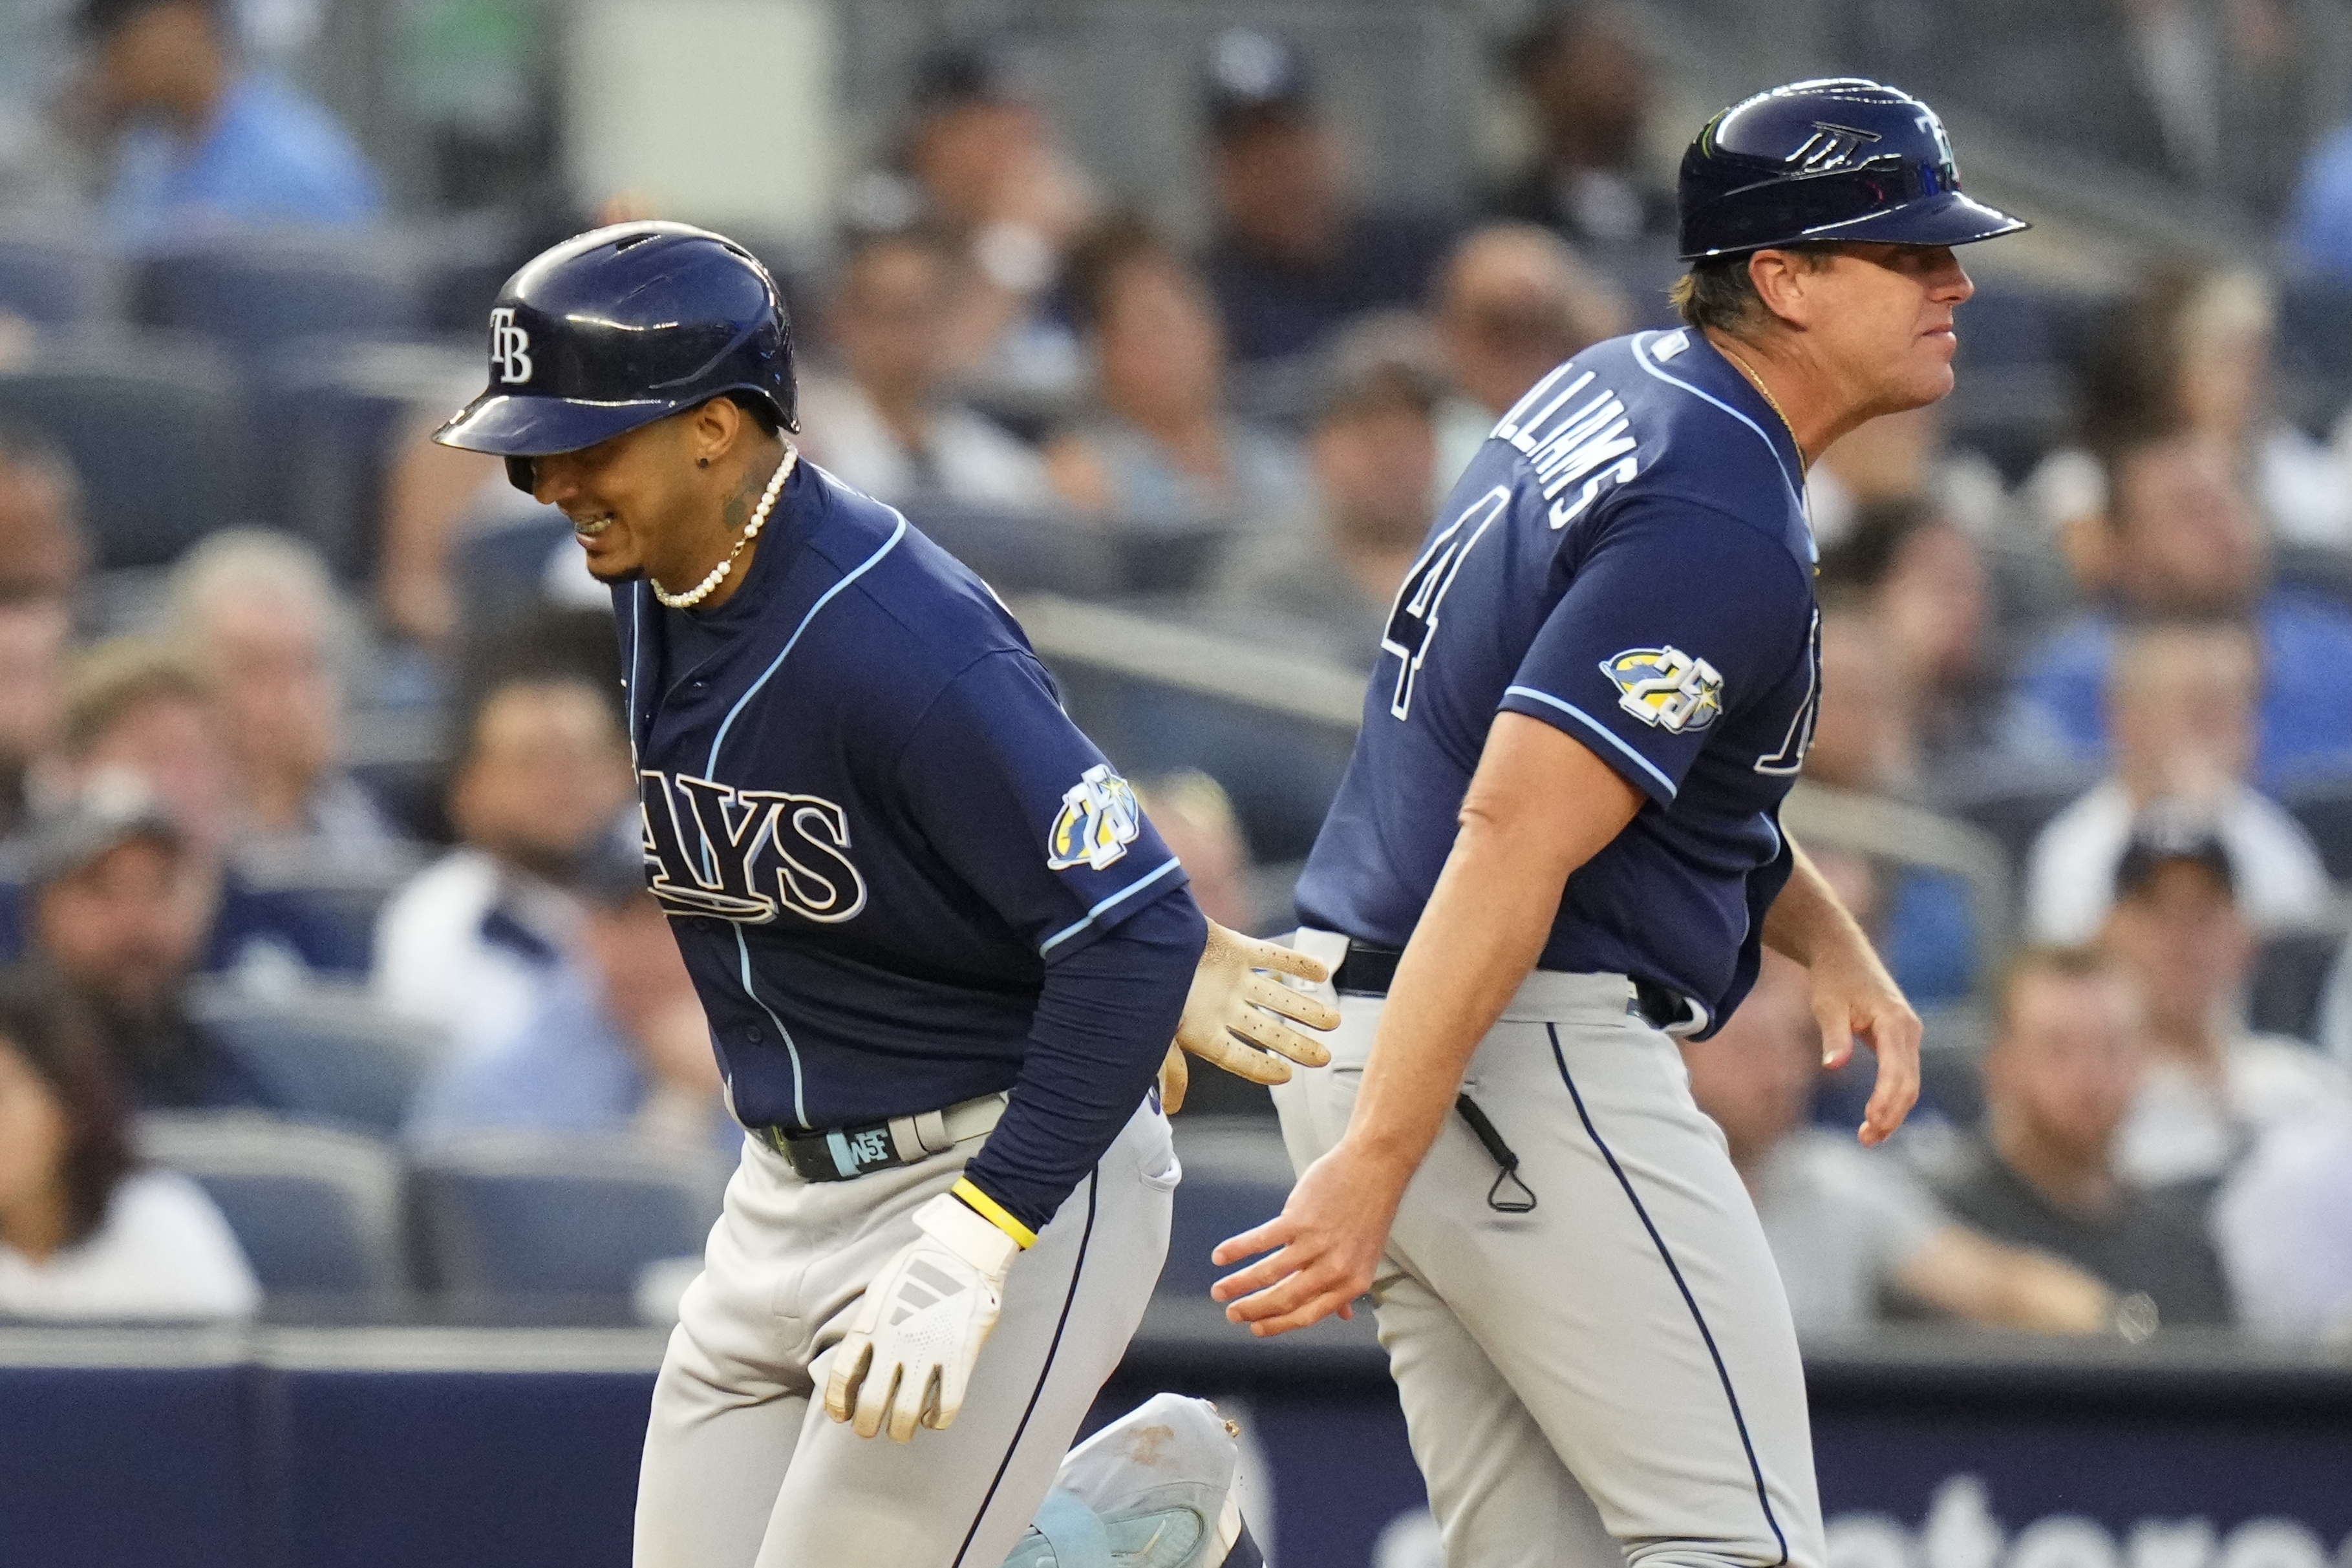 No wonder at 20, Rays' Wander Franco is quite a hit